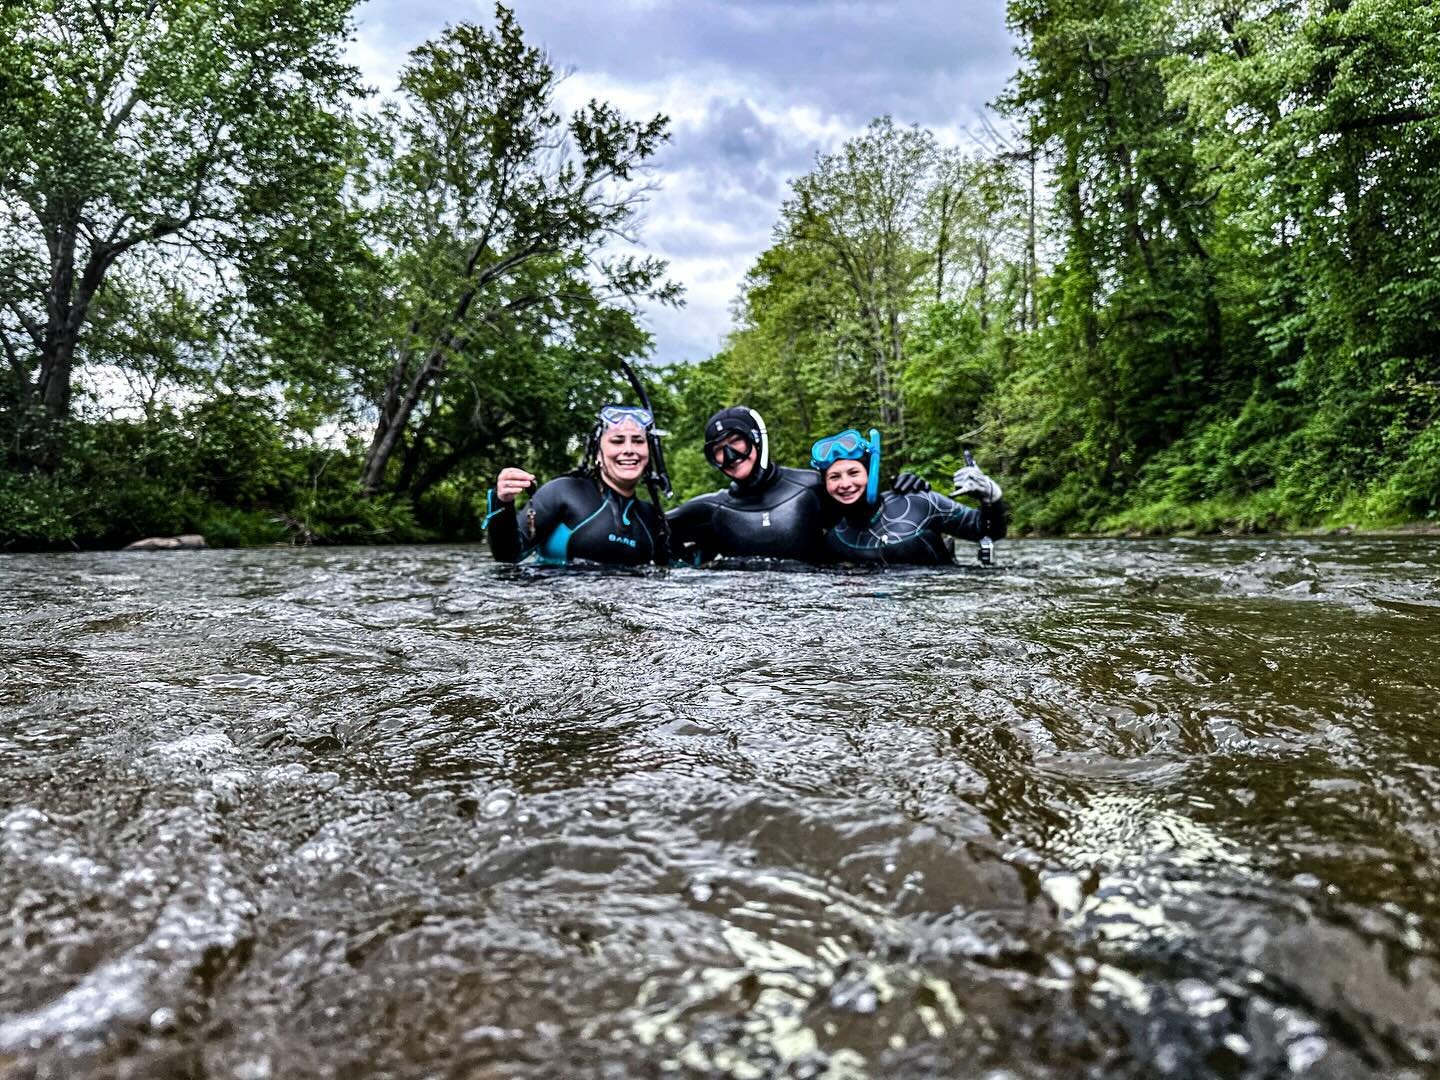 We had an amazing time adventuring with @oxbowriversnorkeling yesterday! 🤿💦
We can&rsquo;t wait to show you how special our local freshwater ecosystems are.
HUGE thank you to Kevin from Oxbow for sharing his endless knowledge with us &amp; we are s